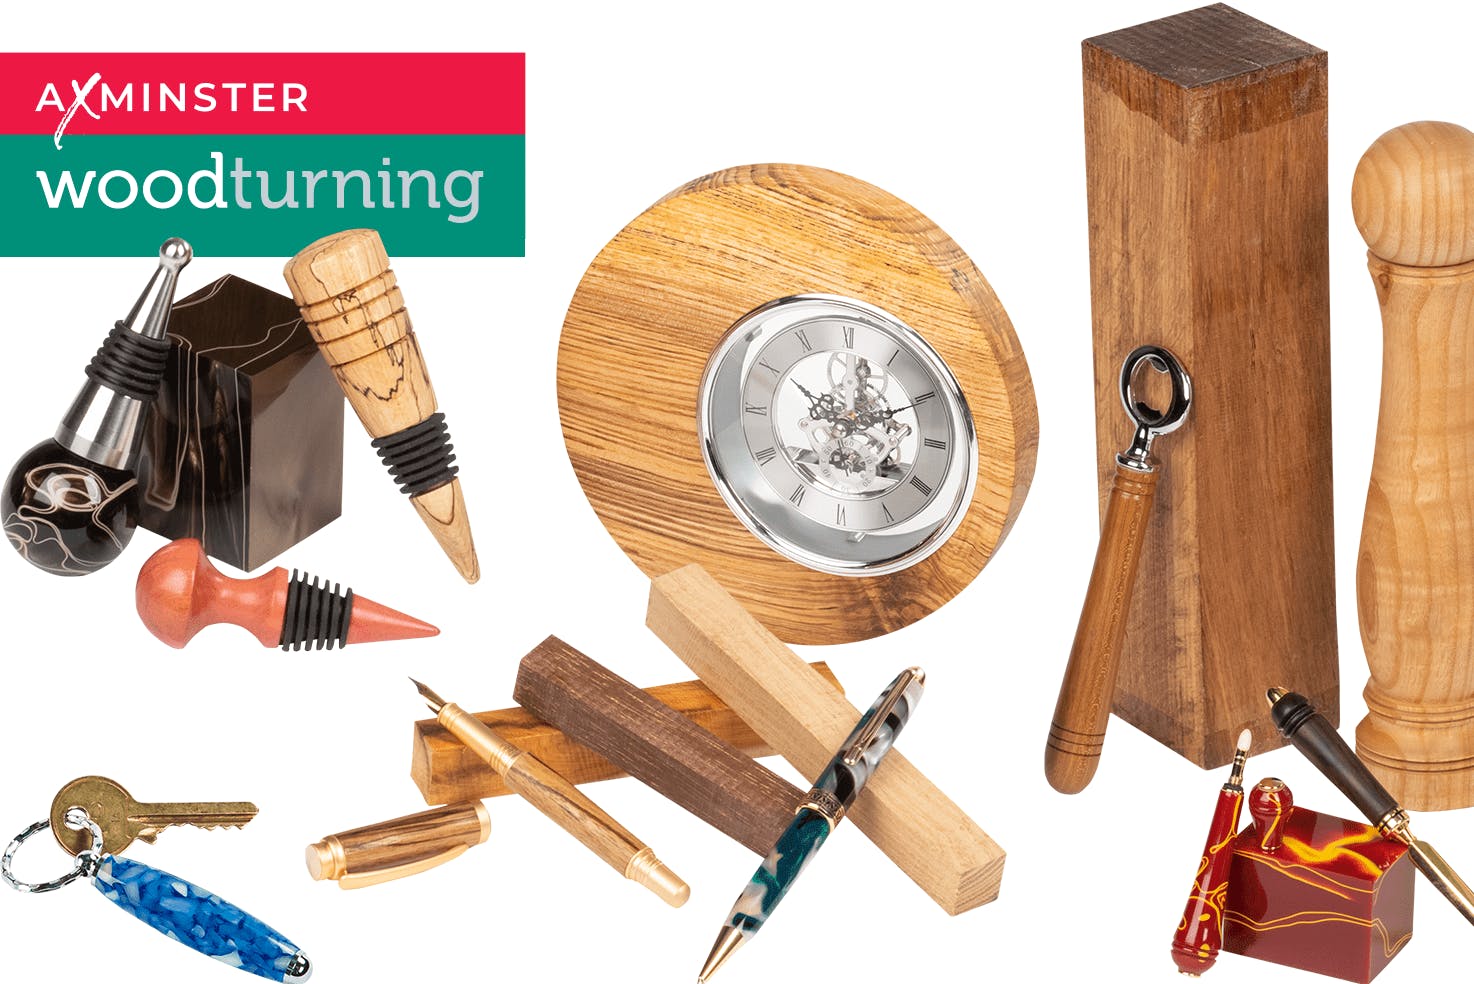 Woodturning pen and project kits